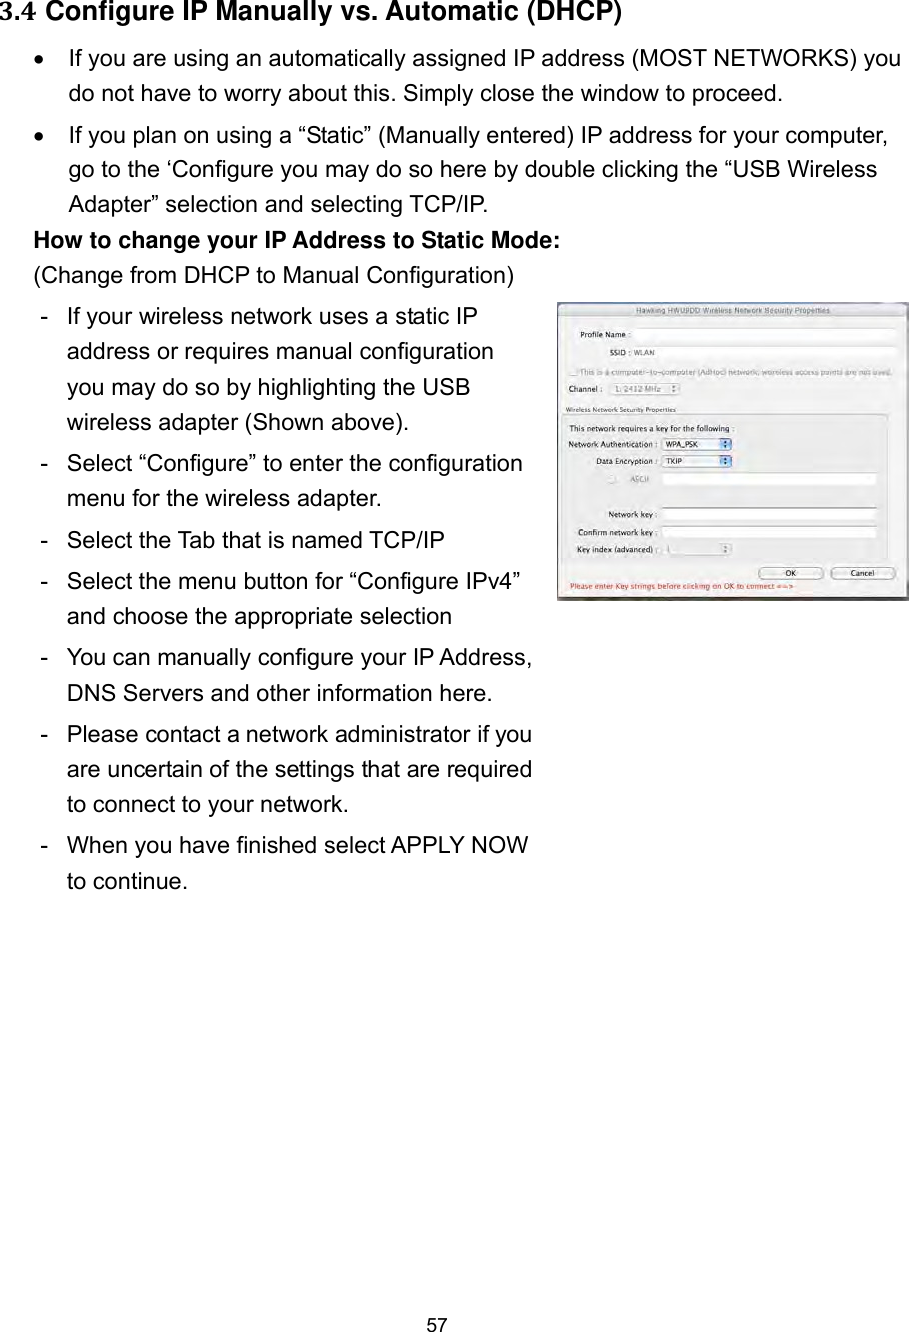  57   3.4 Configure IP Manually vs. Automatic (DHCP)   If you are using an automatically assigned IP address (MOST NETWORKS) you do not have to worry about this. Simply close the window to proceed.   If you plan on using a “Static” (Manually entered) IP address for your computer, go to the ‘Configure you may do so here by double clicking the “USB Wireless Adapter” selection and selecting TCP/IP.           How to change your IP Address to Static Mode:   (Change from DHCP to Manual Configuration) -  If your wireless network uses a static IP address or requires manual configuration you may do so by highlighting the USB wireless adapter (Shown above).   -  Select “Configure” to enter the configuration menu for the wireless adapter. -  Select the Tab that is named TCP/IP -  Select the menu button for “Configure IPv4” and choose the appropriate selection -  You can manually configure your IP Address, DNS Servers and other information here. -  Please contact a network administrator if you are uncertain of the settings that are required to connect to your network. -  When you have finished select APPLY NOW to continue.     